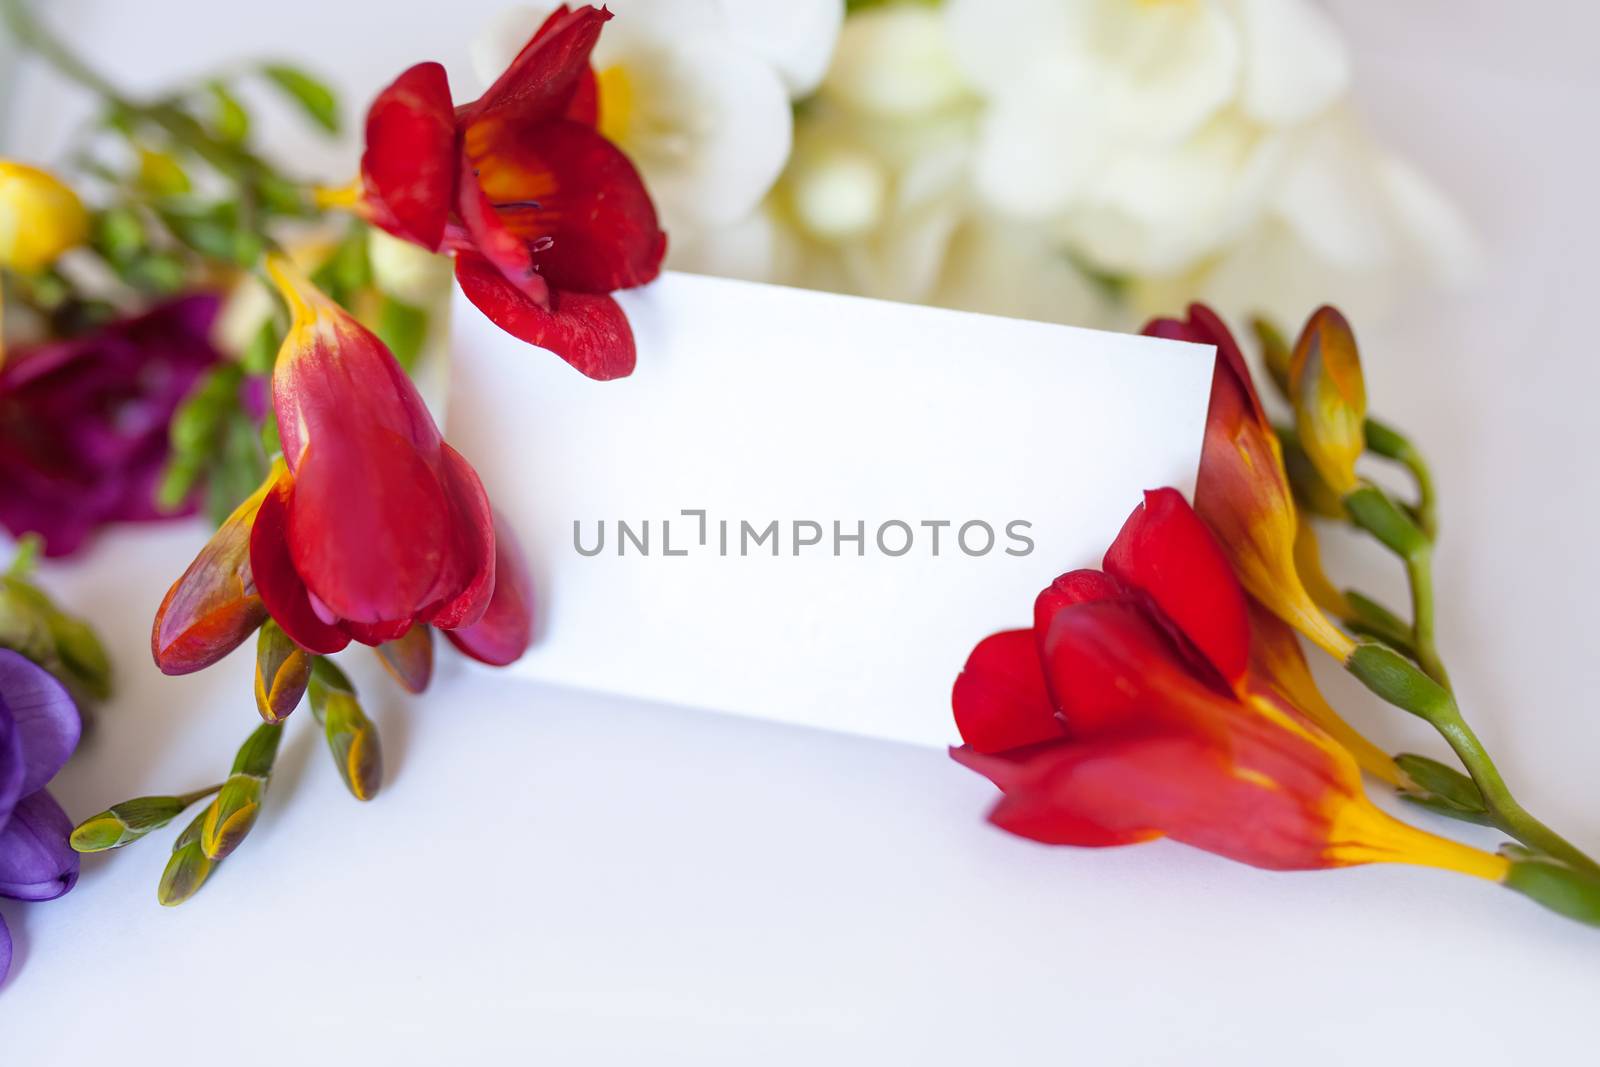 Composition freesia flowers and blank postcard on white by Angel_a